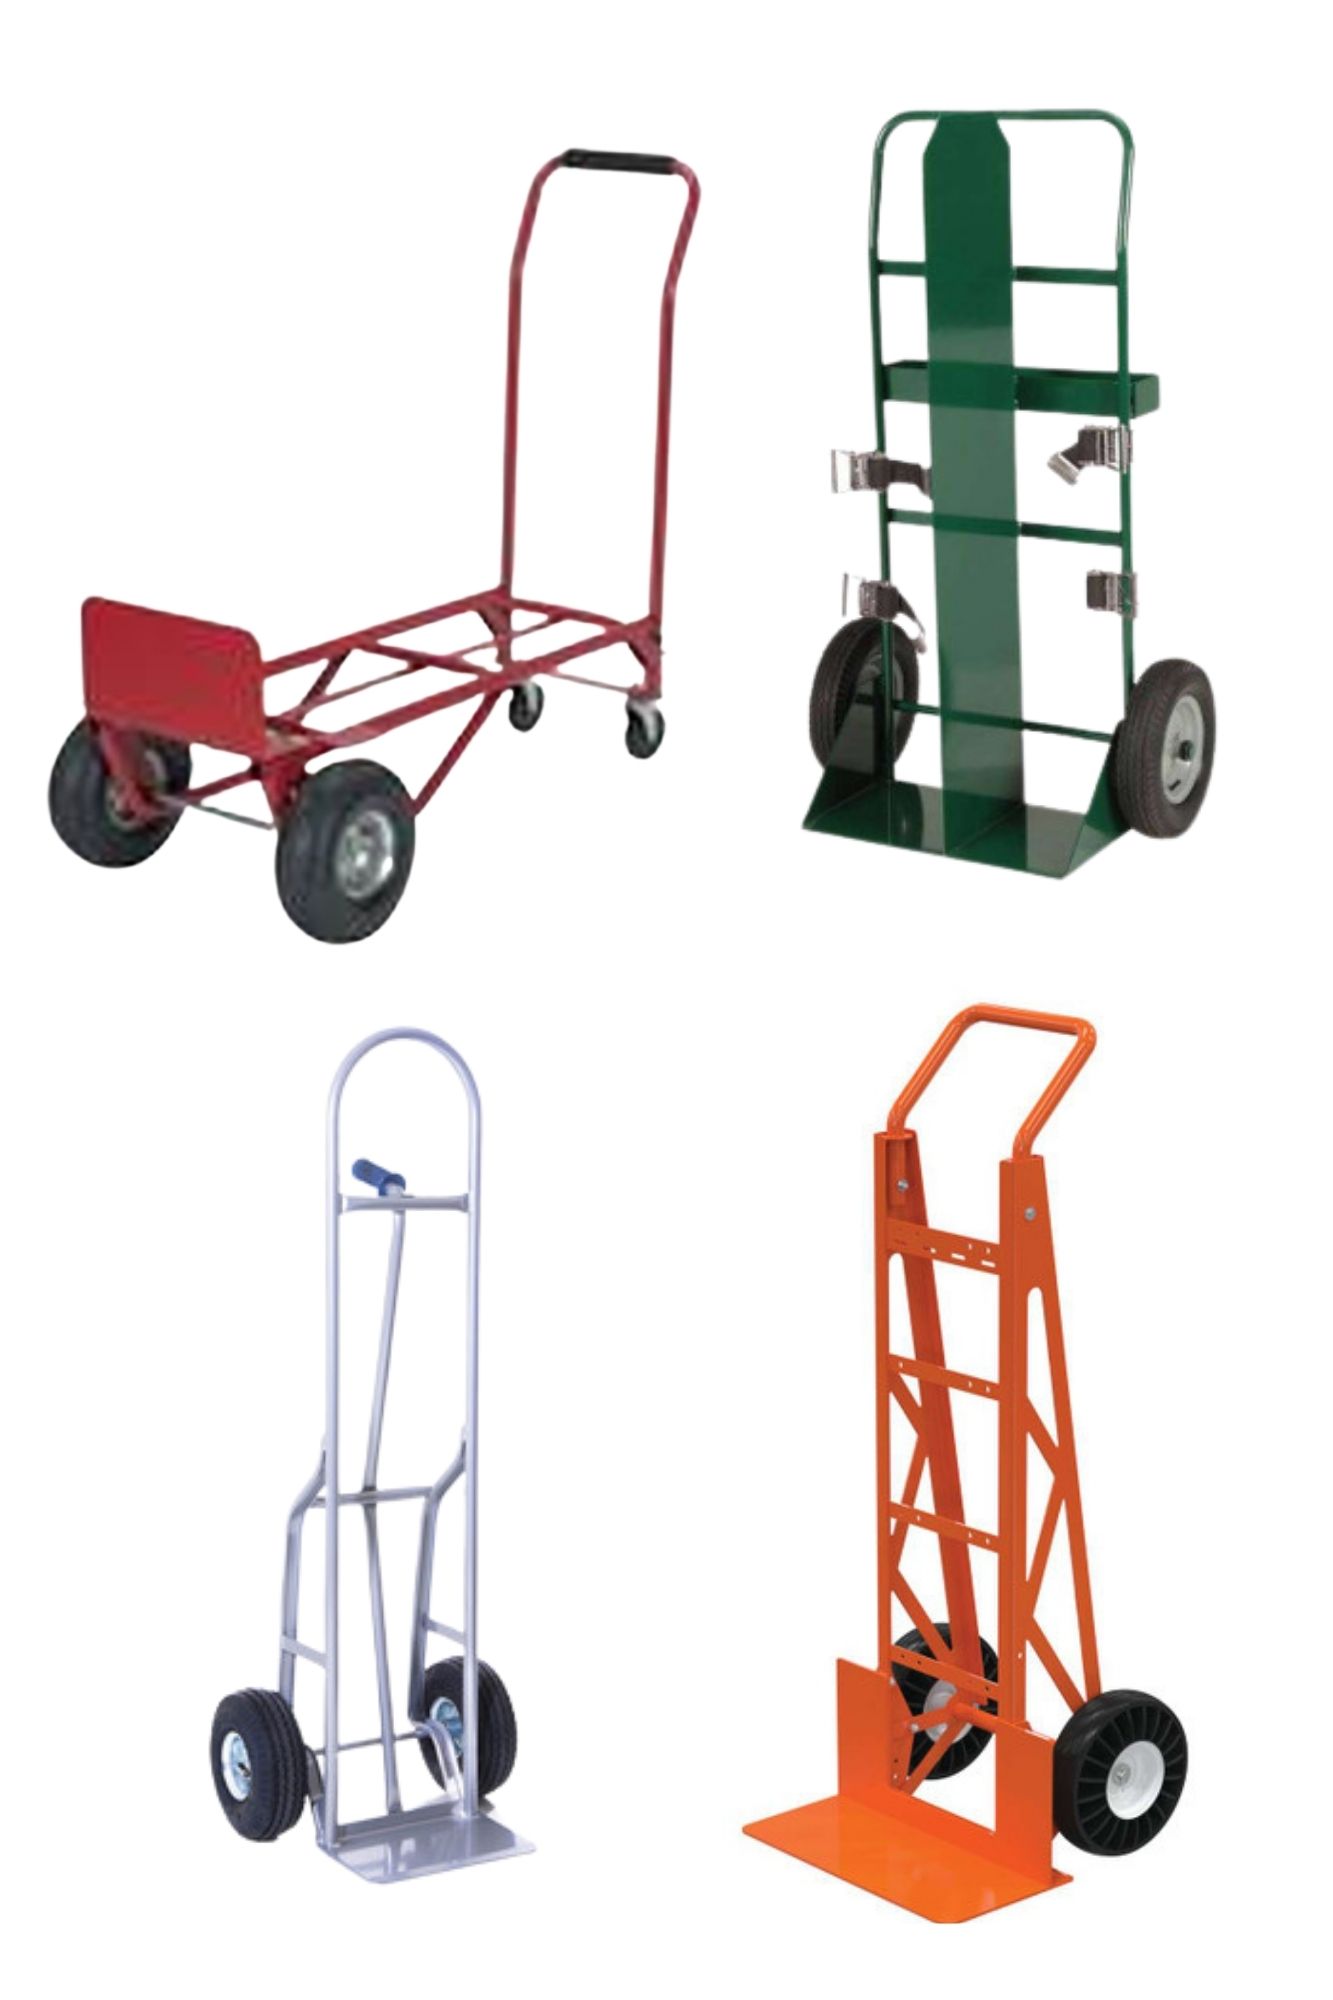 different types of hand trucks for material handling operations